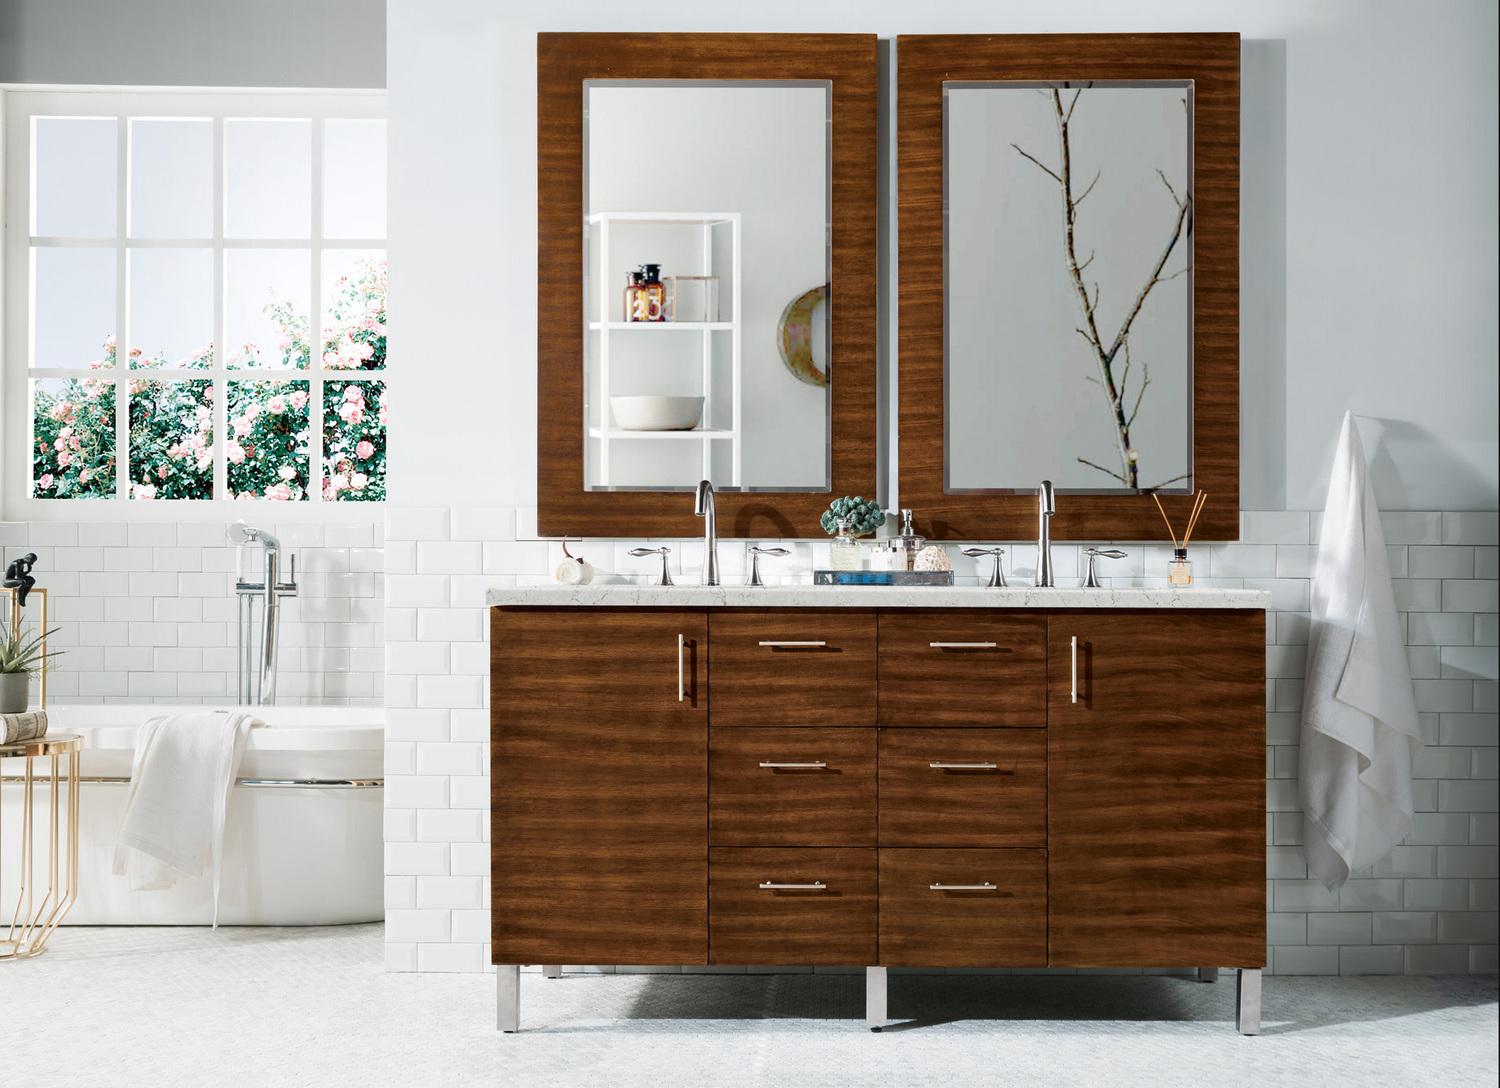 70 inch double sink vanity James Martin Vanity American Walnut Contemporary/Modern, Transitional